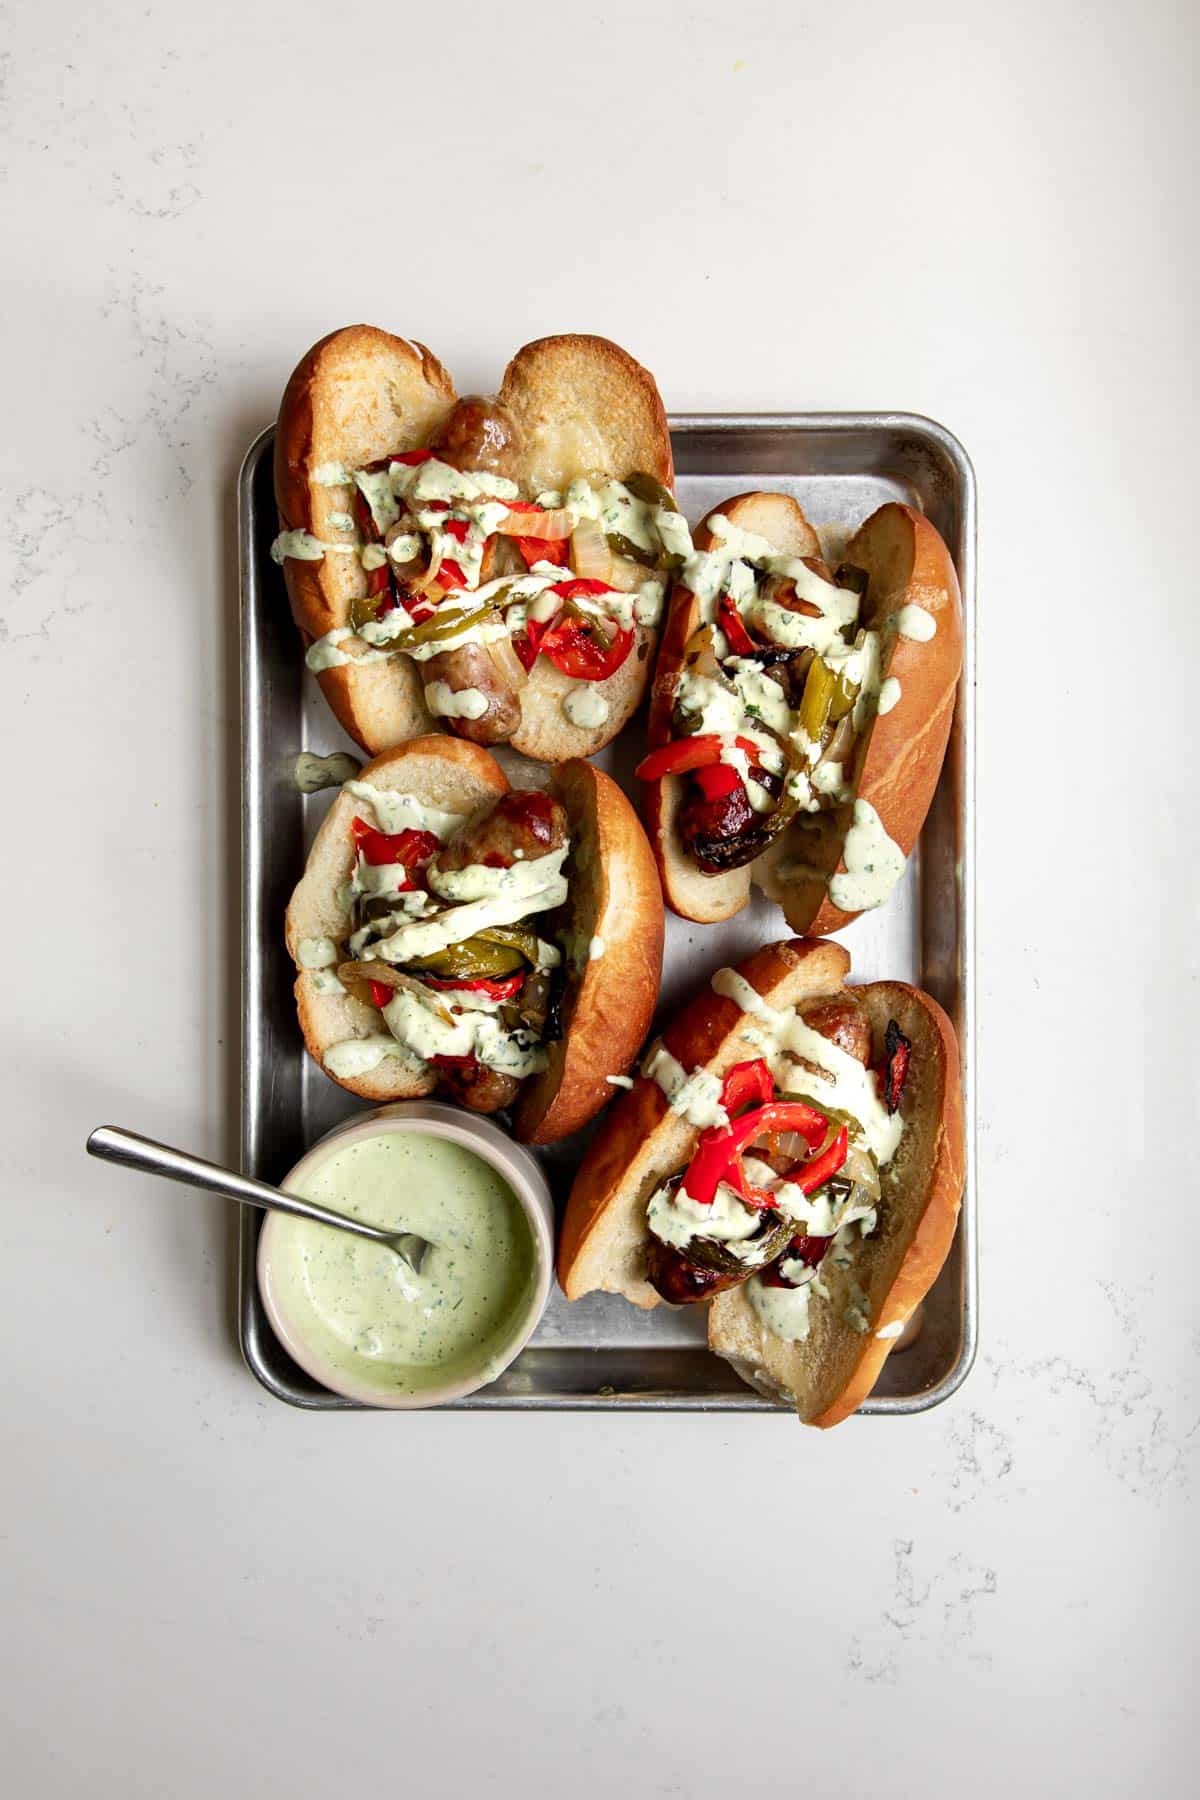 4 Italian Sausage Sandwiches with roasted peppers and onions with basil mayo on top, along with a small bowl of basil aioli sauce on a baking sheet.